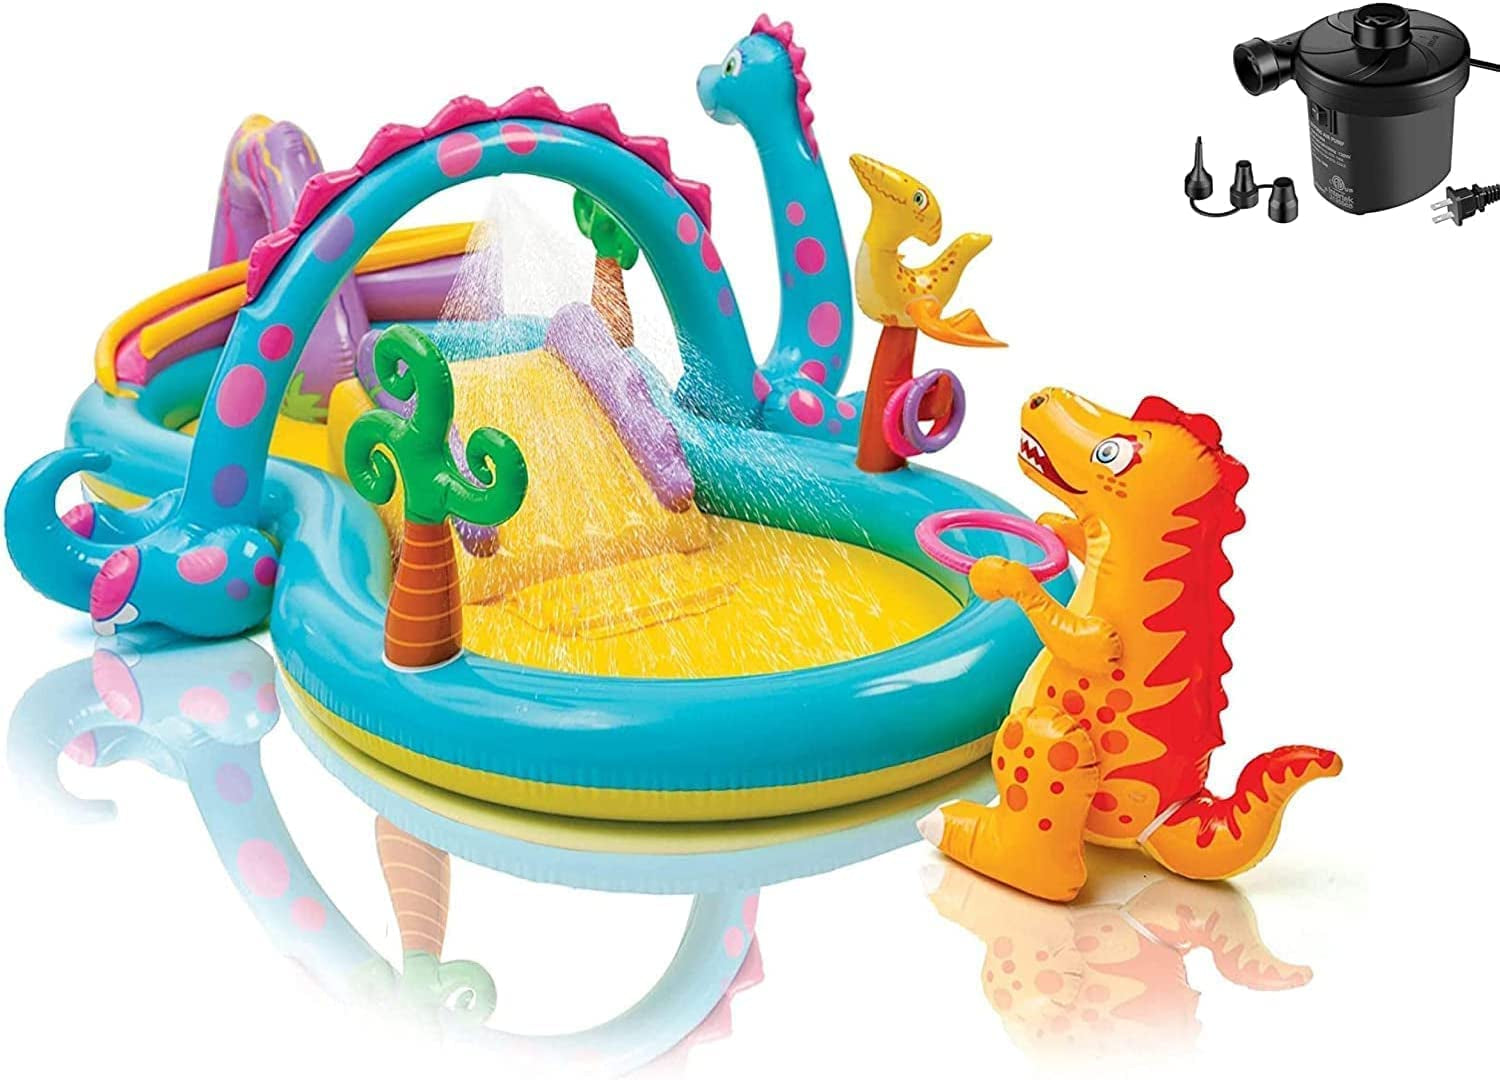 Inflatable Dinosaur Play Center with Water Slide, Ball Toss, and Ring Toss